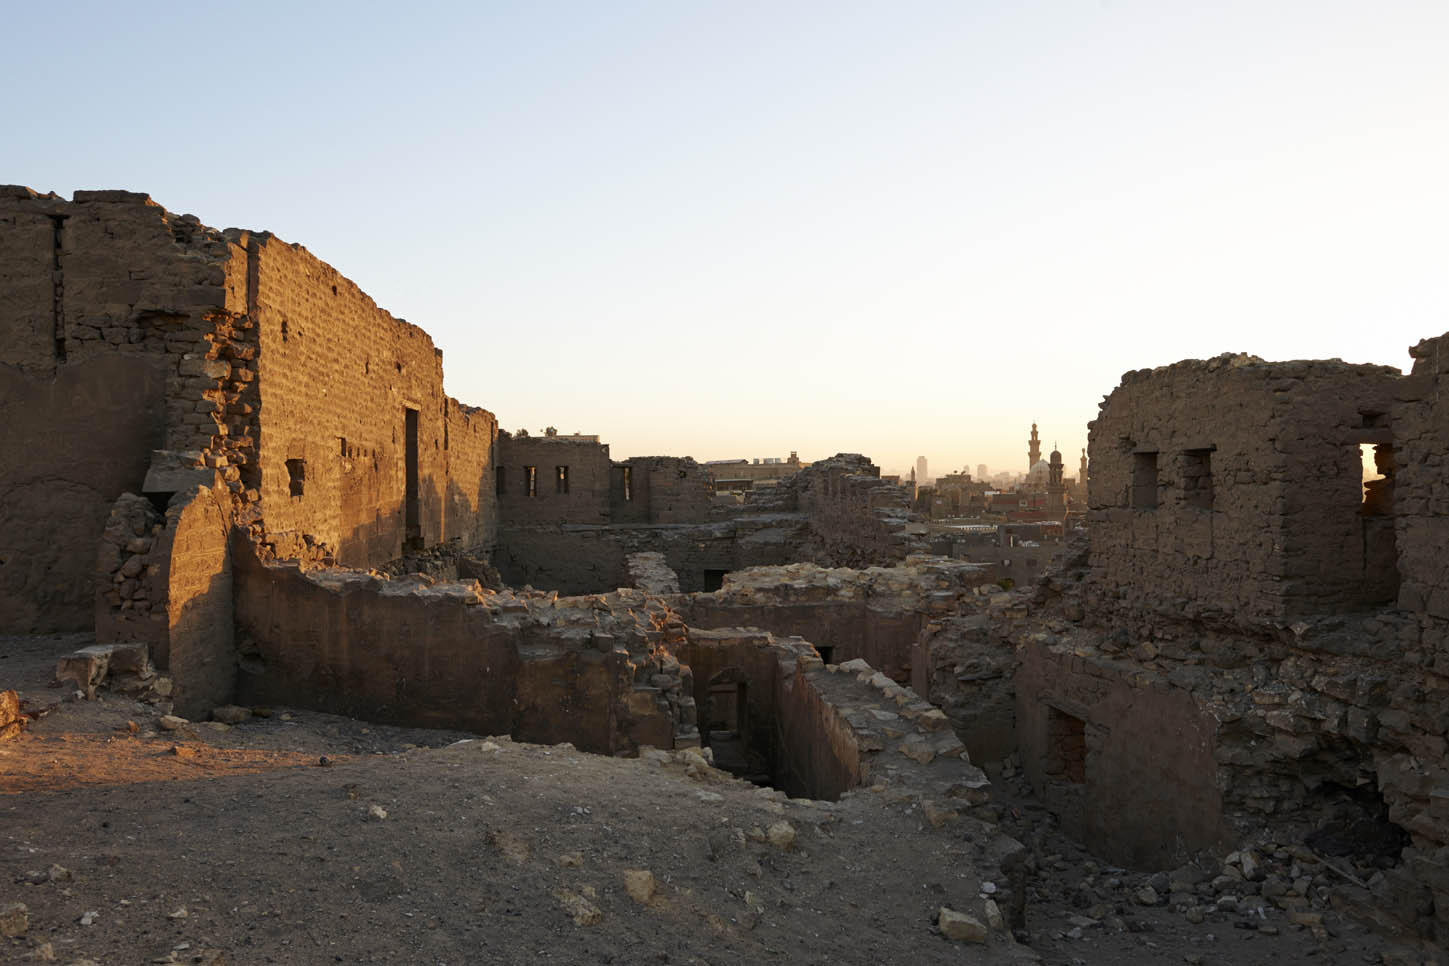 General view within ruins